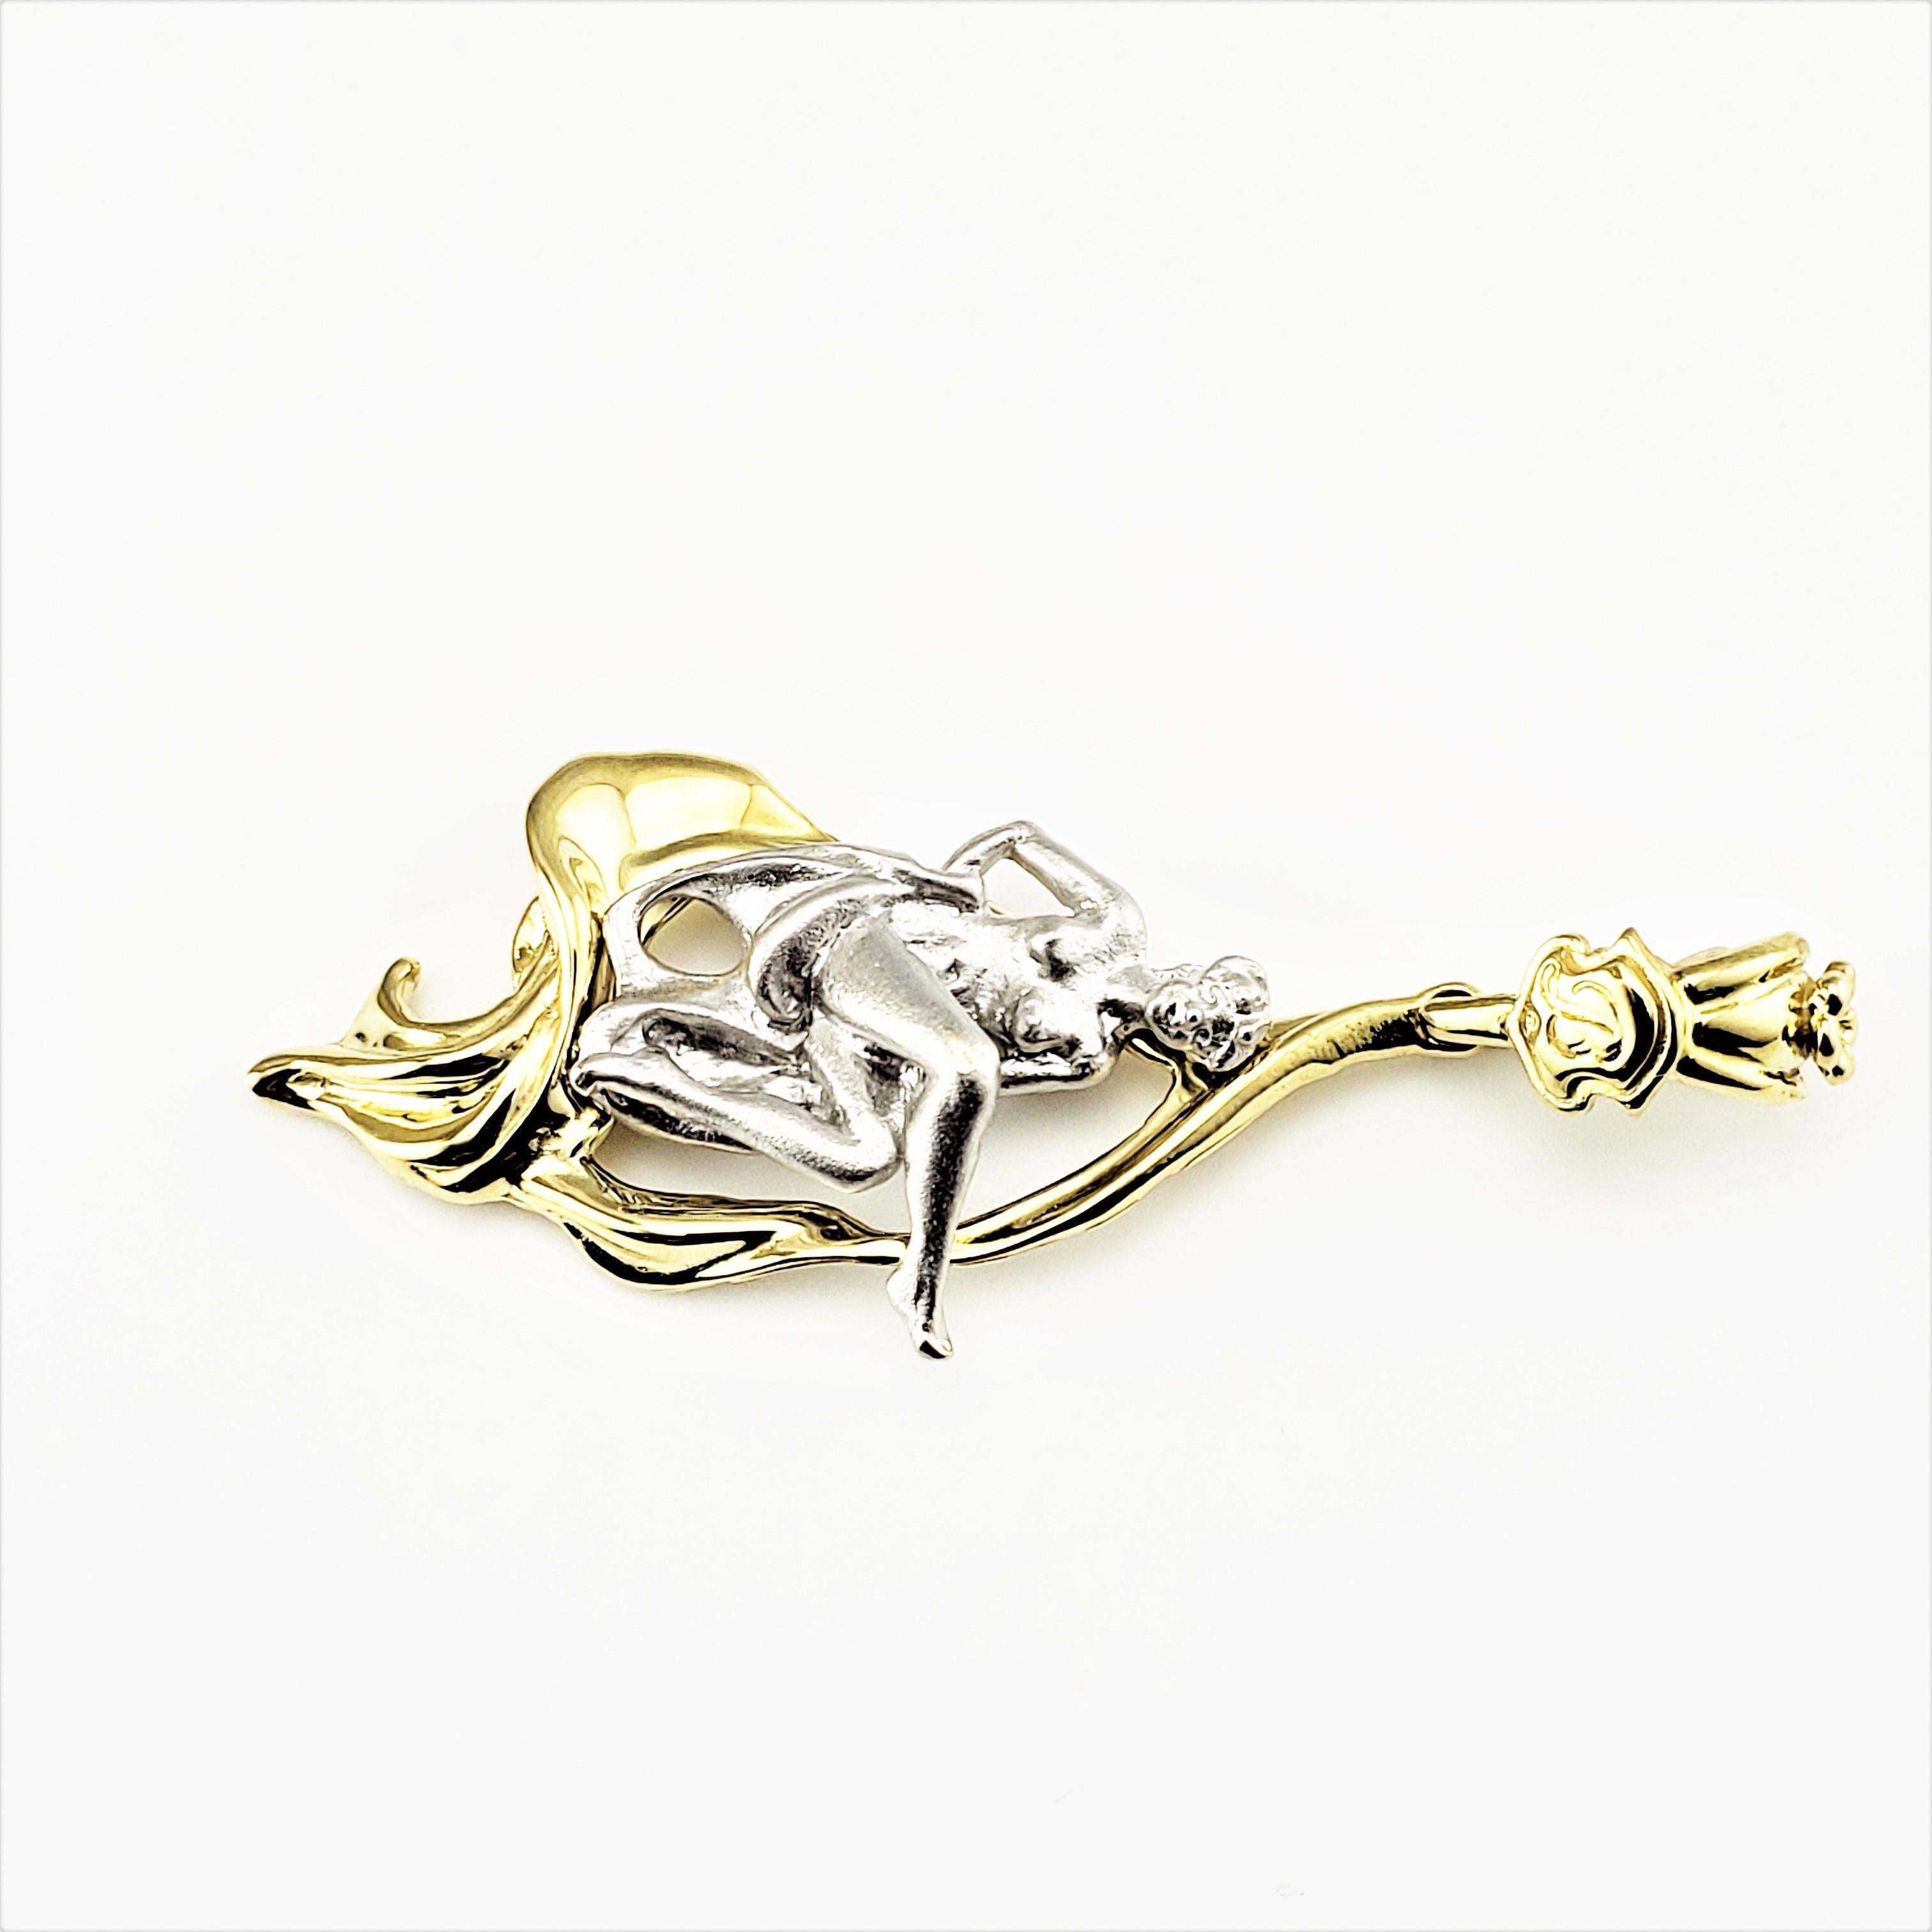 Vintage 18 Karat Yellow and White Gold Art Deco Woman Pendant-

This stunning pendant features a lovely female figure crafted in beautifully detailed white and yellow gold.

*Chain not included.

Size:  50 mm x  19 mm 

Weight:  5.4 dwt. / 8.4 